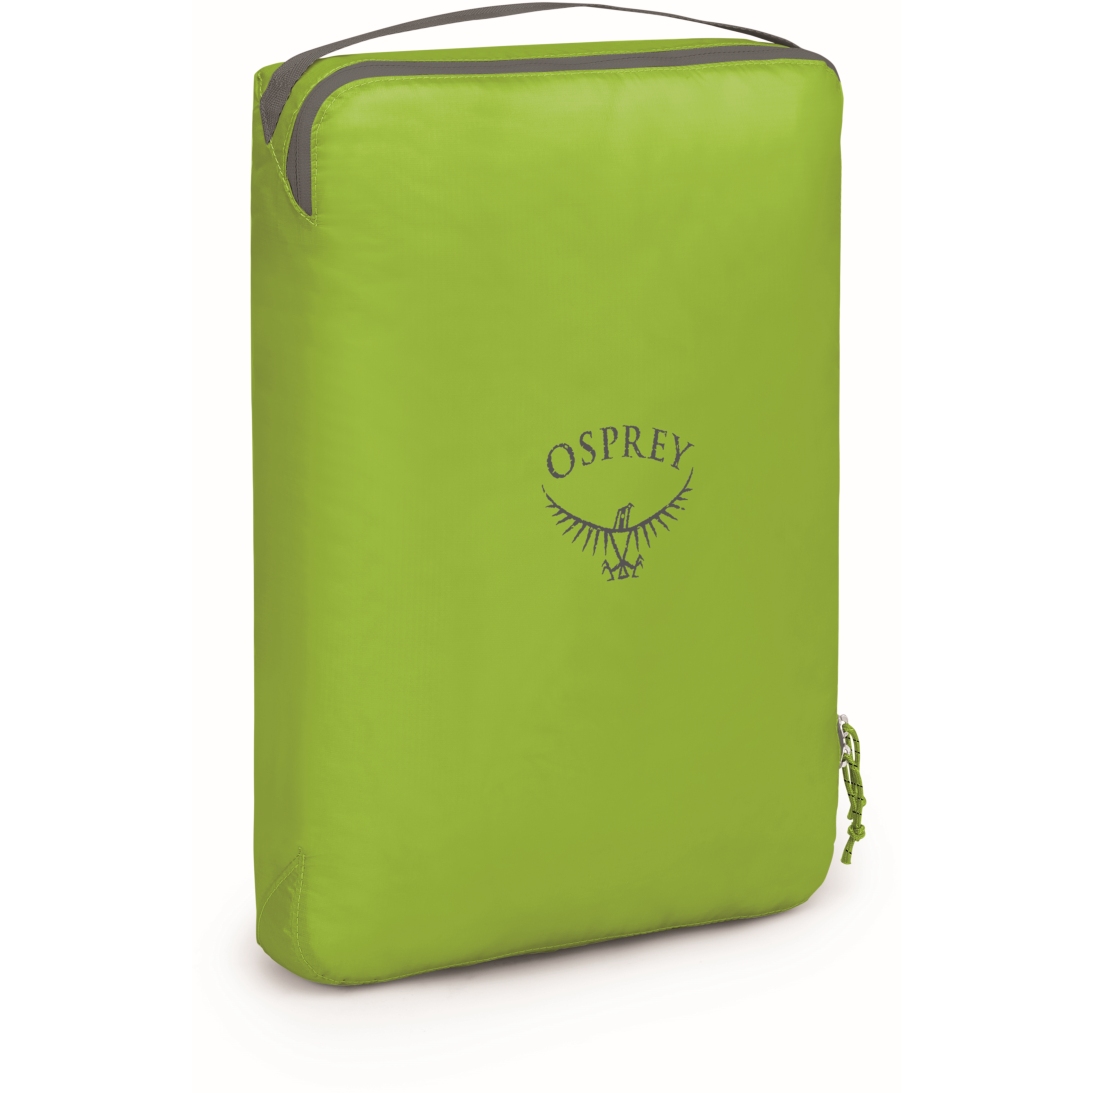 Picture of Osprey Ultralight Packing Cube Large - Limon